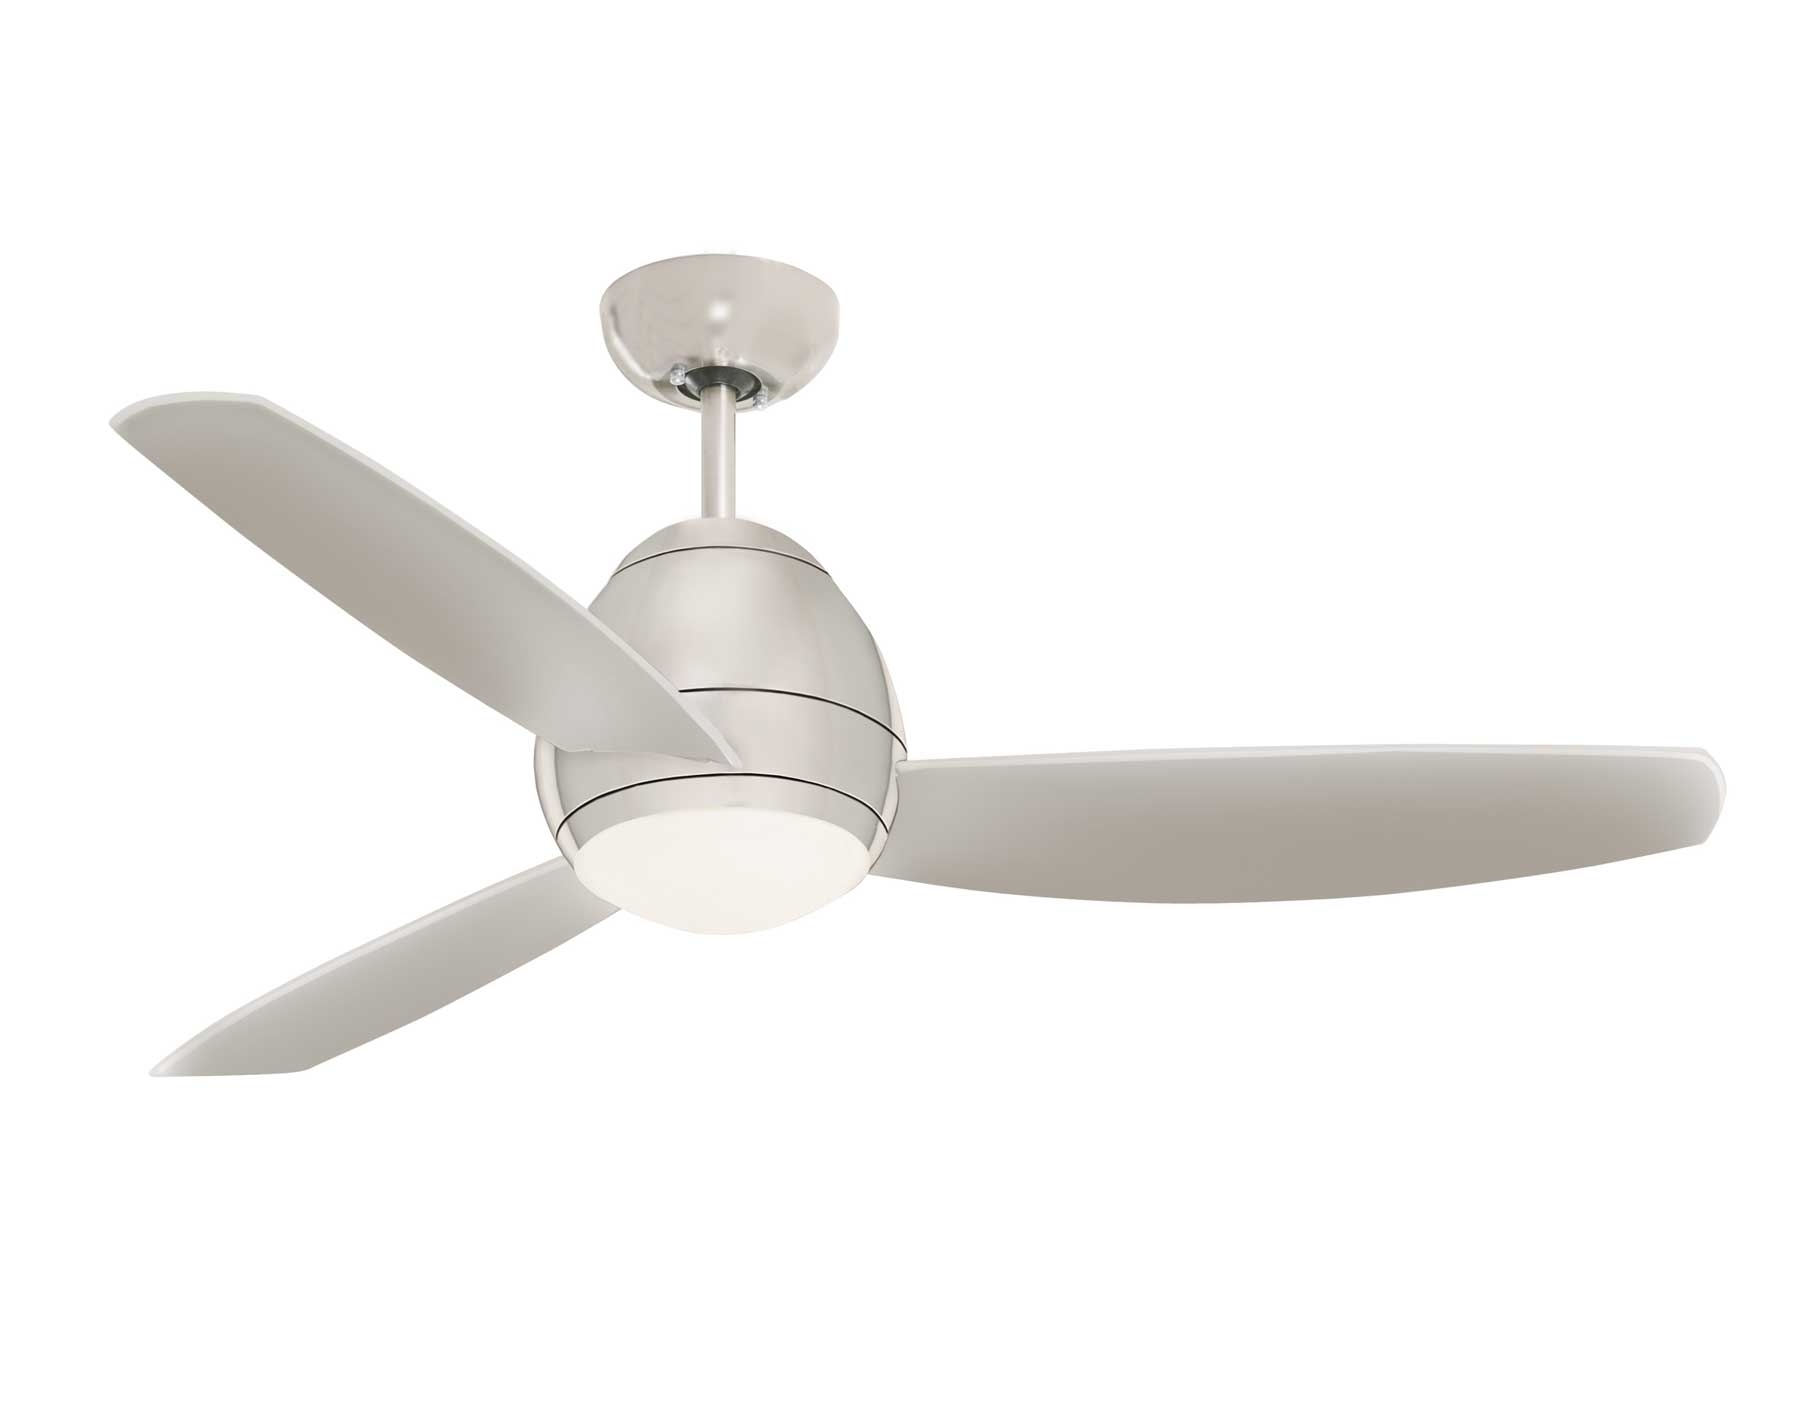 Permalink to Stainless Steel Outdoor Ceiling Fan With Light